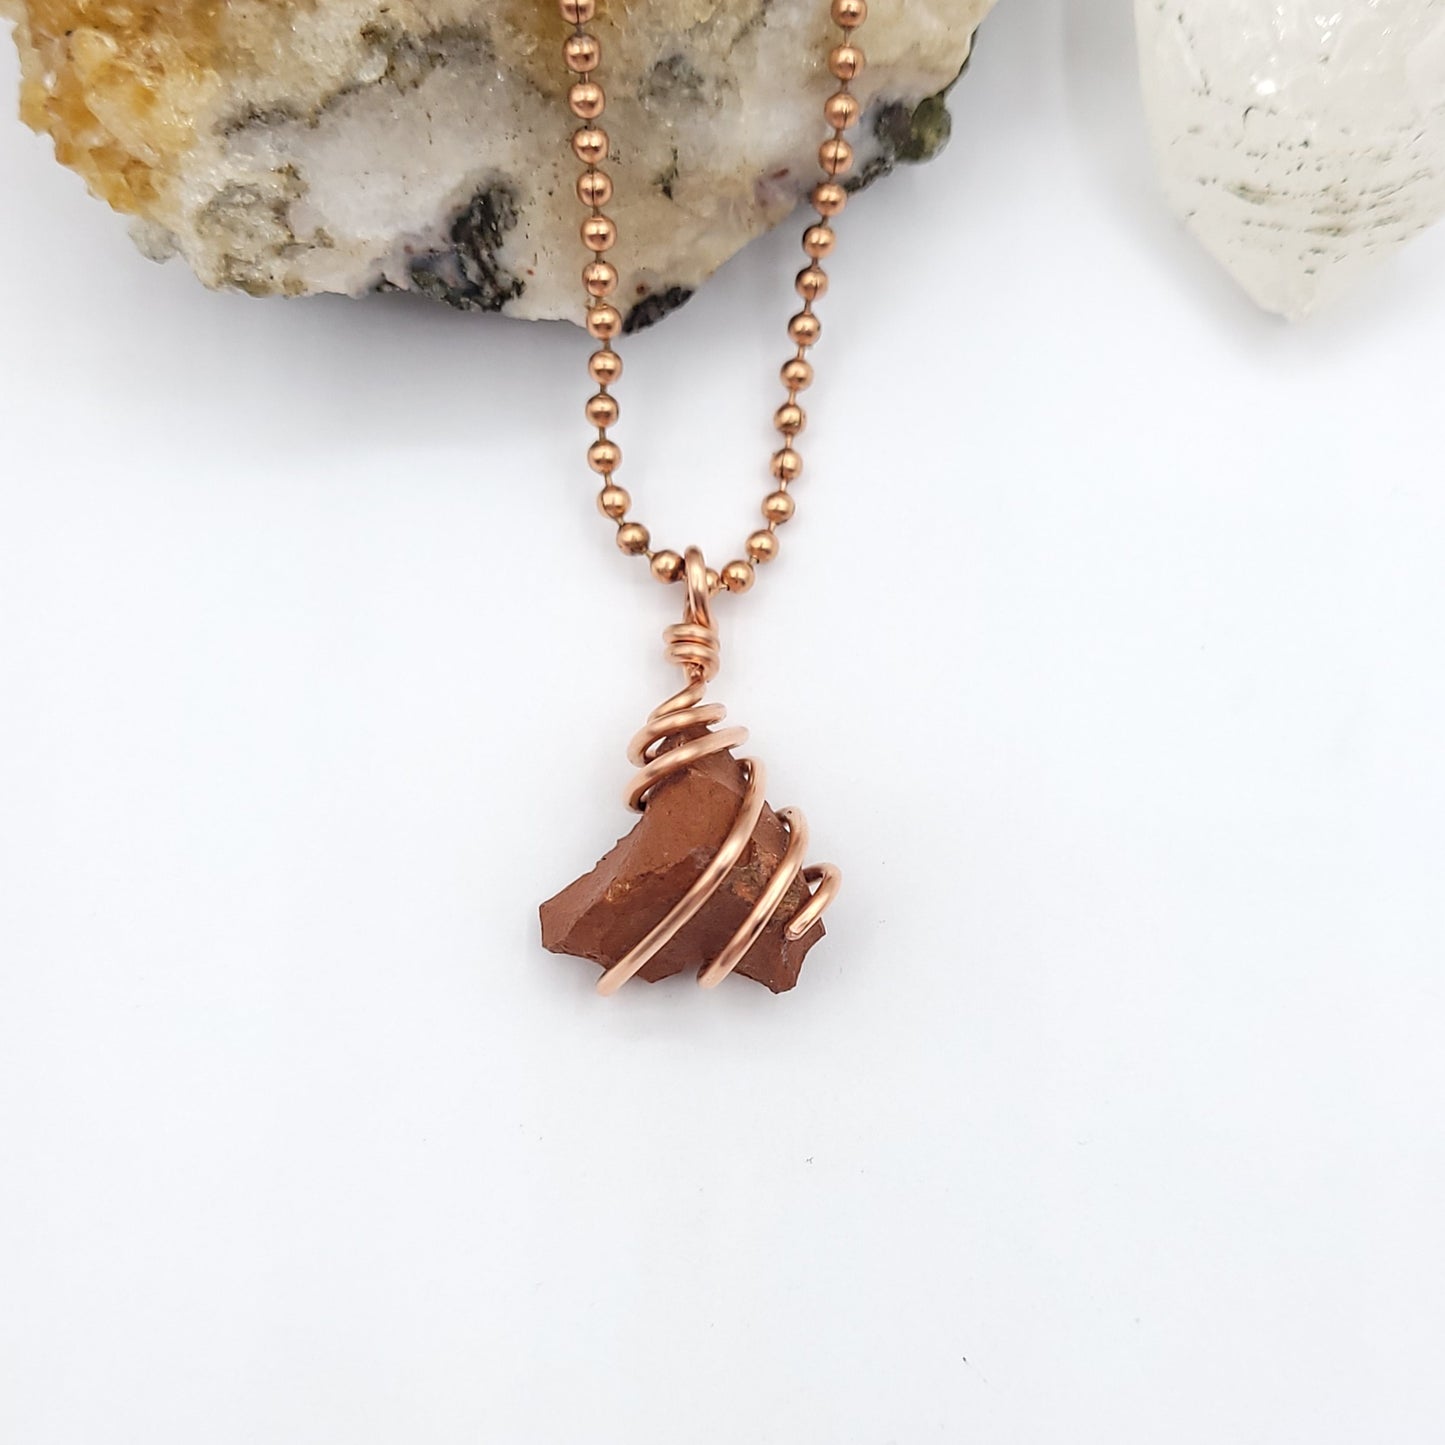 Raw Red Jasper Crystal Necklace in Copper Wire